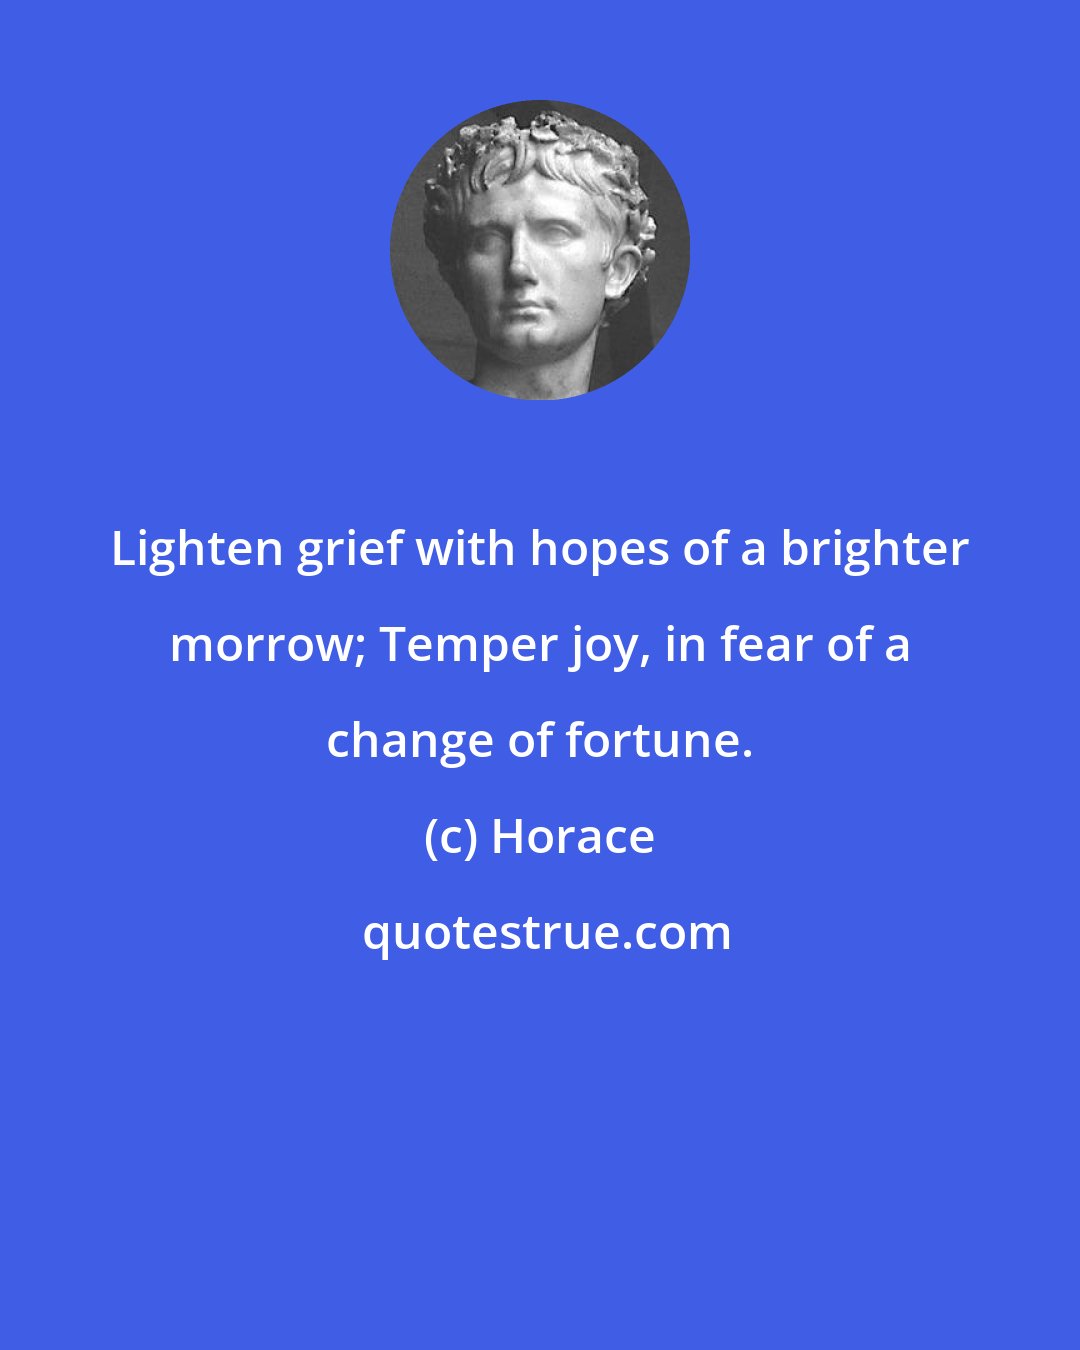 Horace: Lighten grief with hopes of a brighter morrow; Temper joy, in fear of a change of fortune.